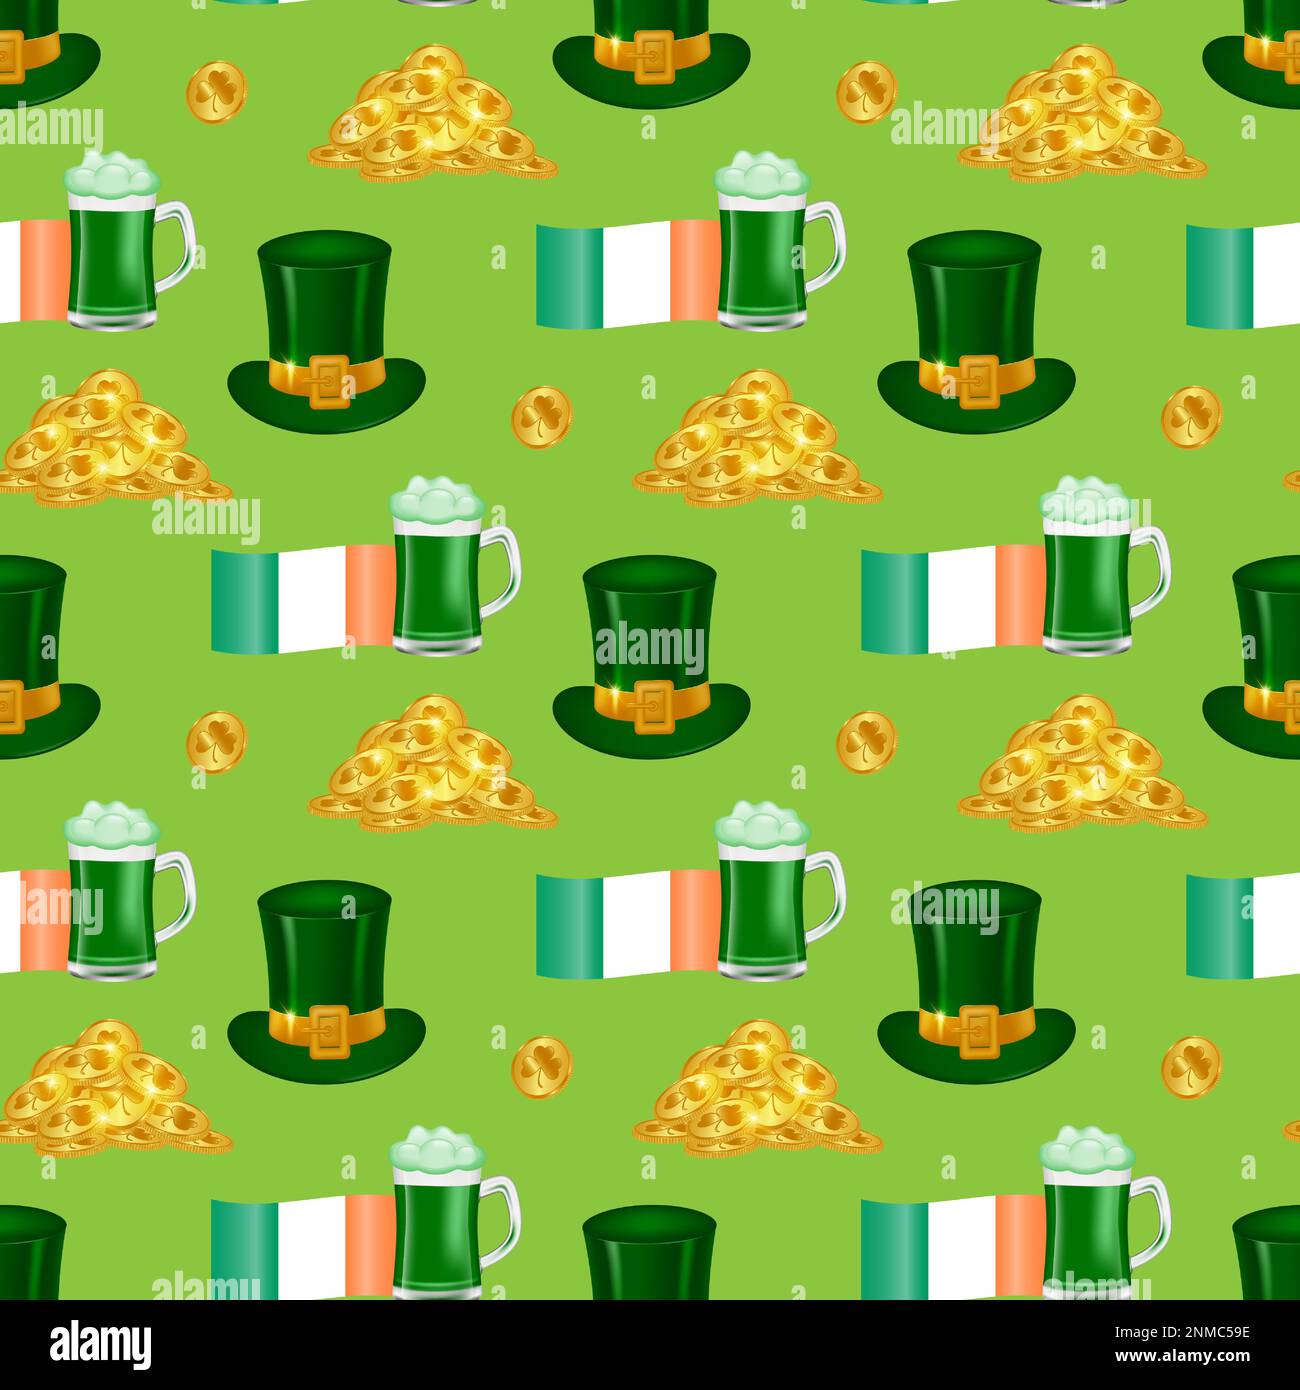 Get into the St. Patrick's Day spirit with our seamless pattern featuring the Irish flag, Leprechaun hat, beer mug, and gold coins. For wallpaper, fab Stock Vector